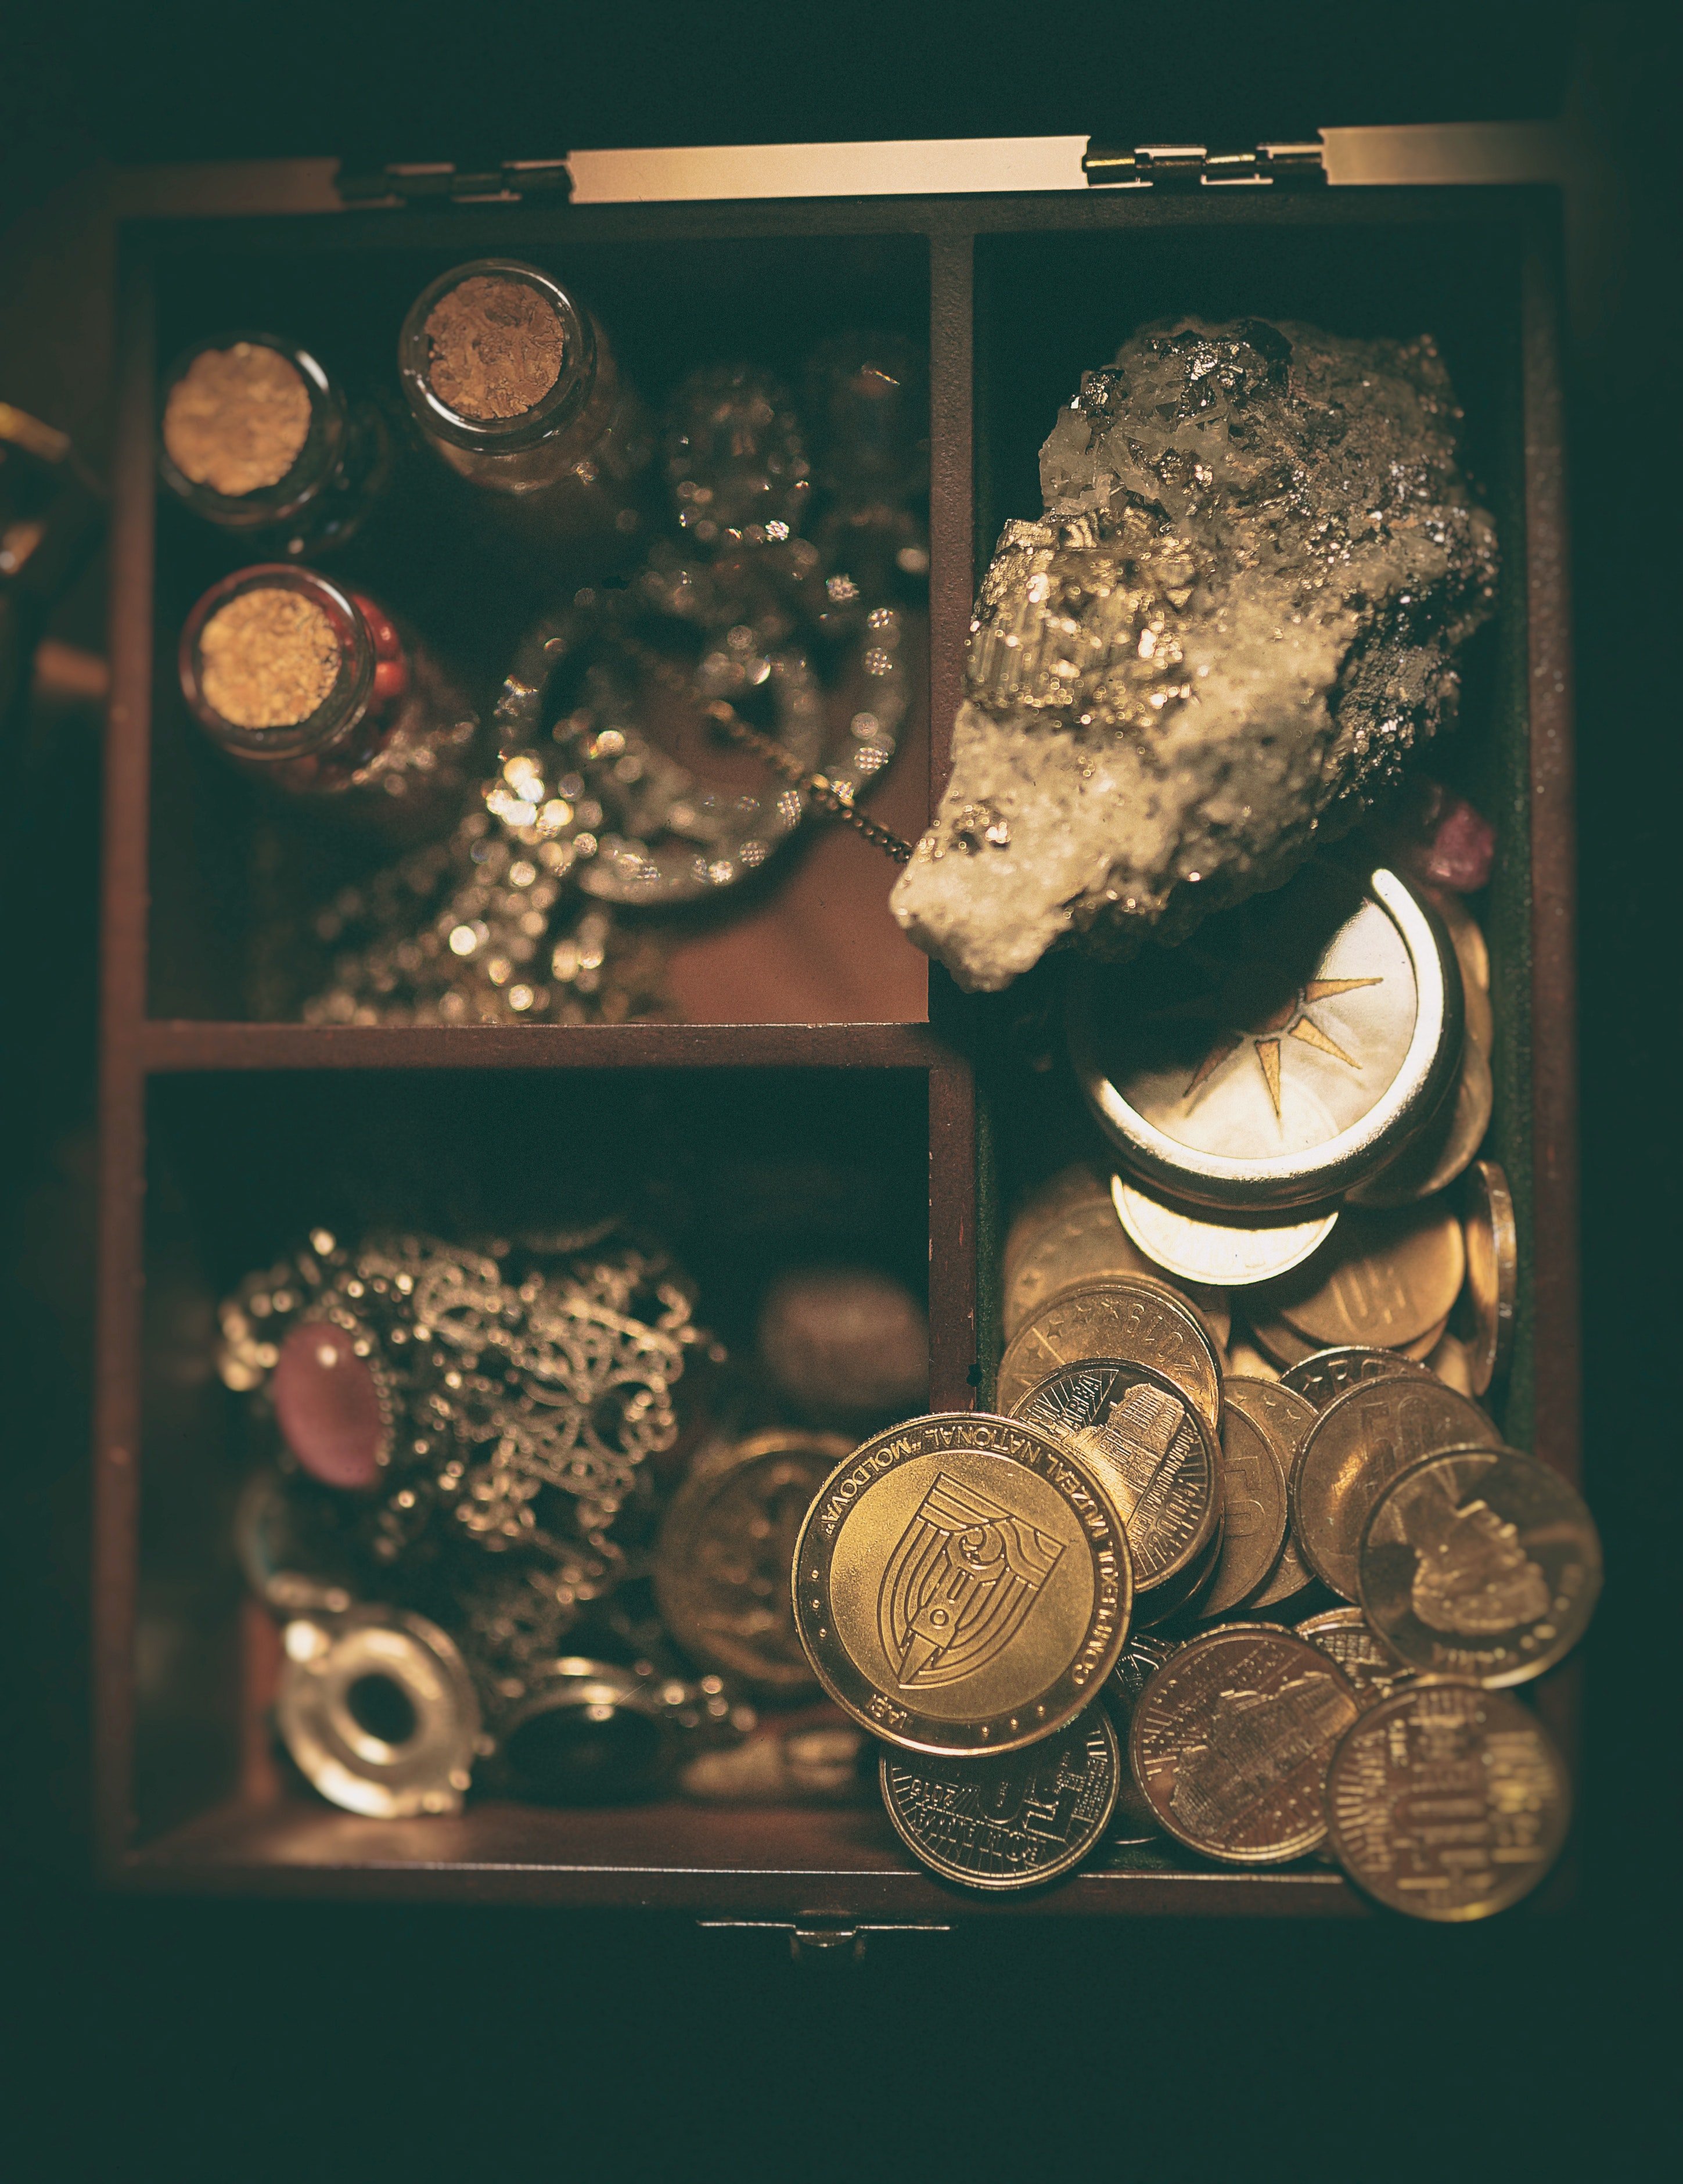 Lexi found gold jewelry and coins. | Source: Pexels